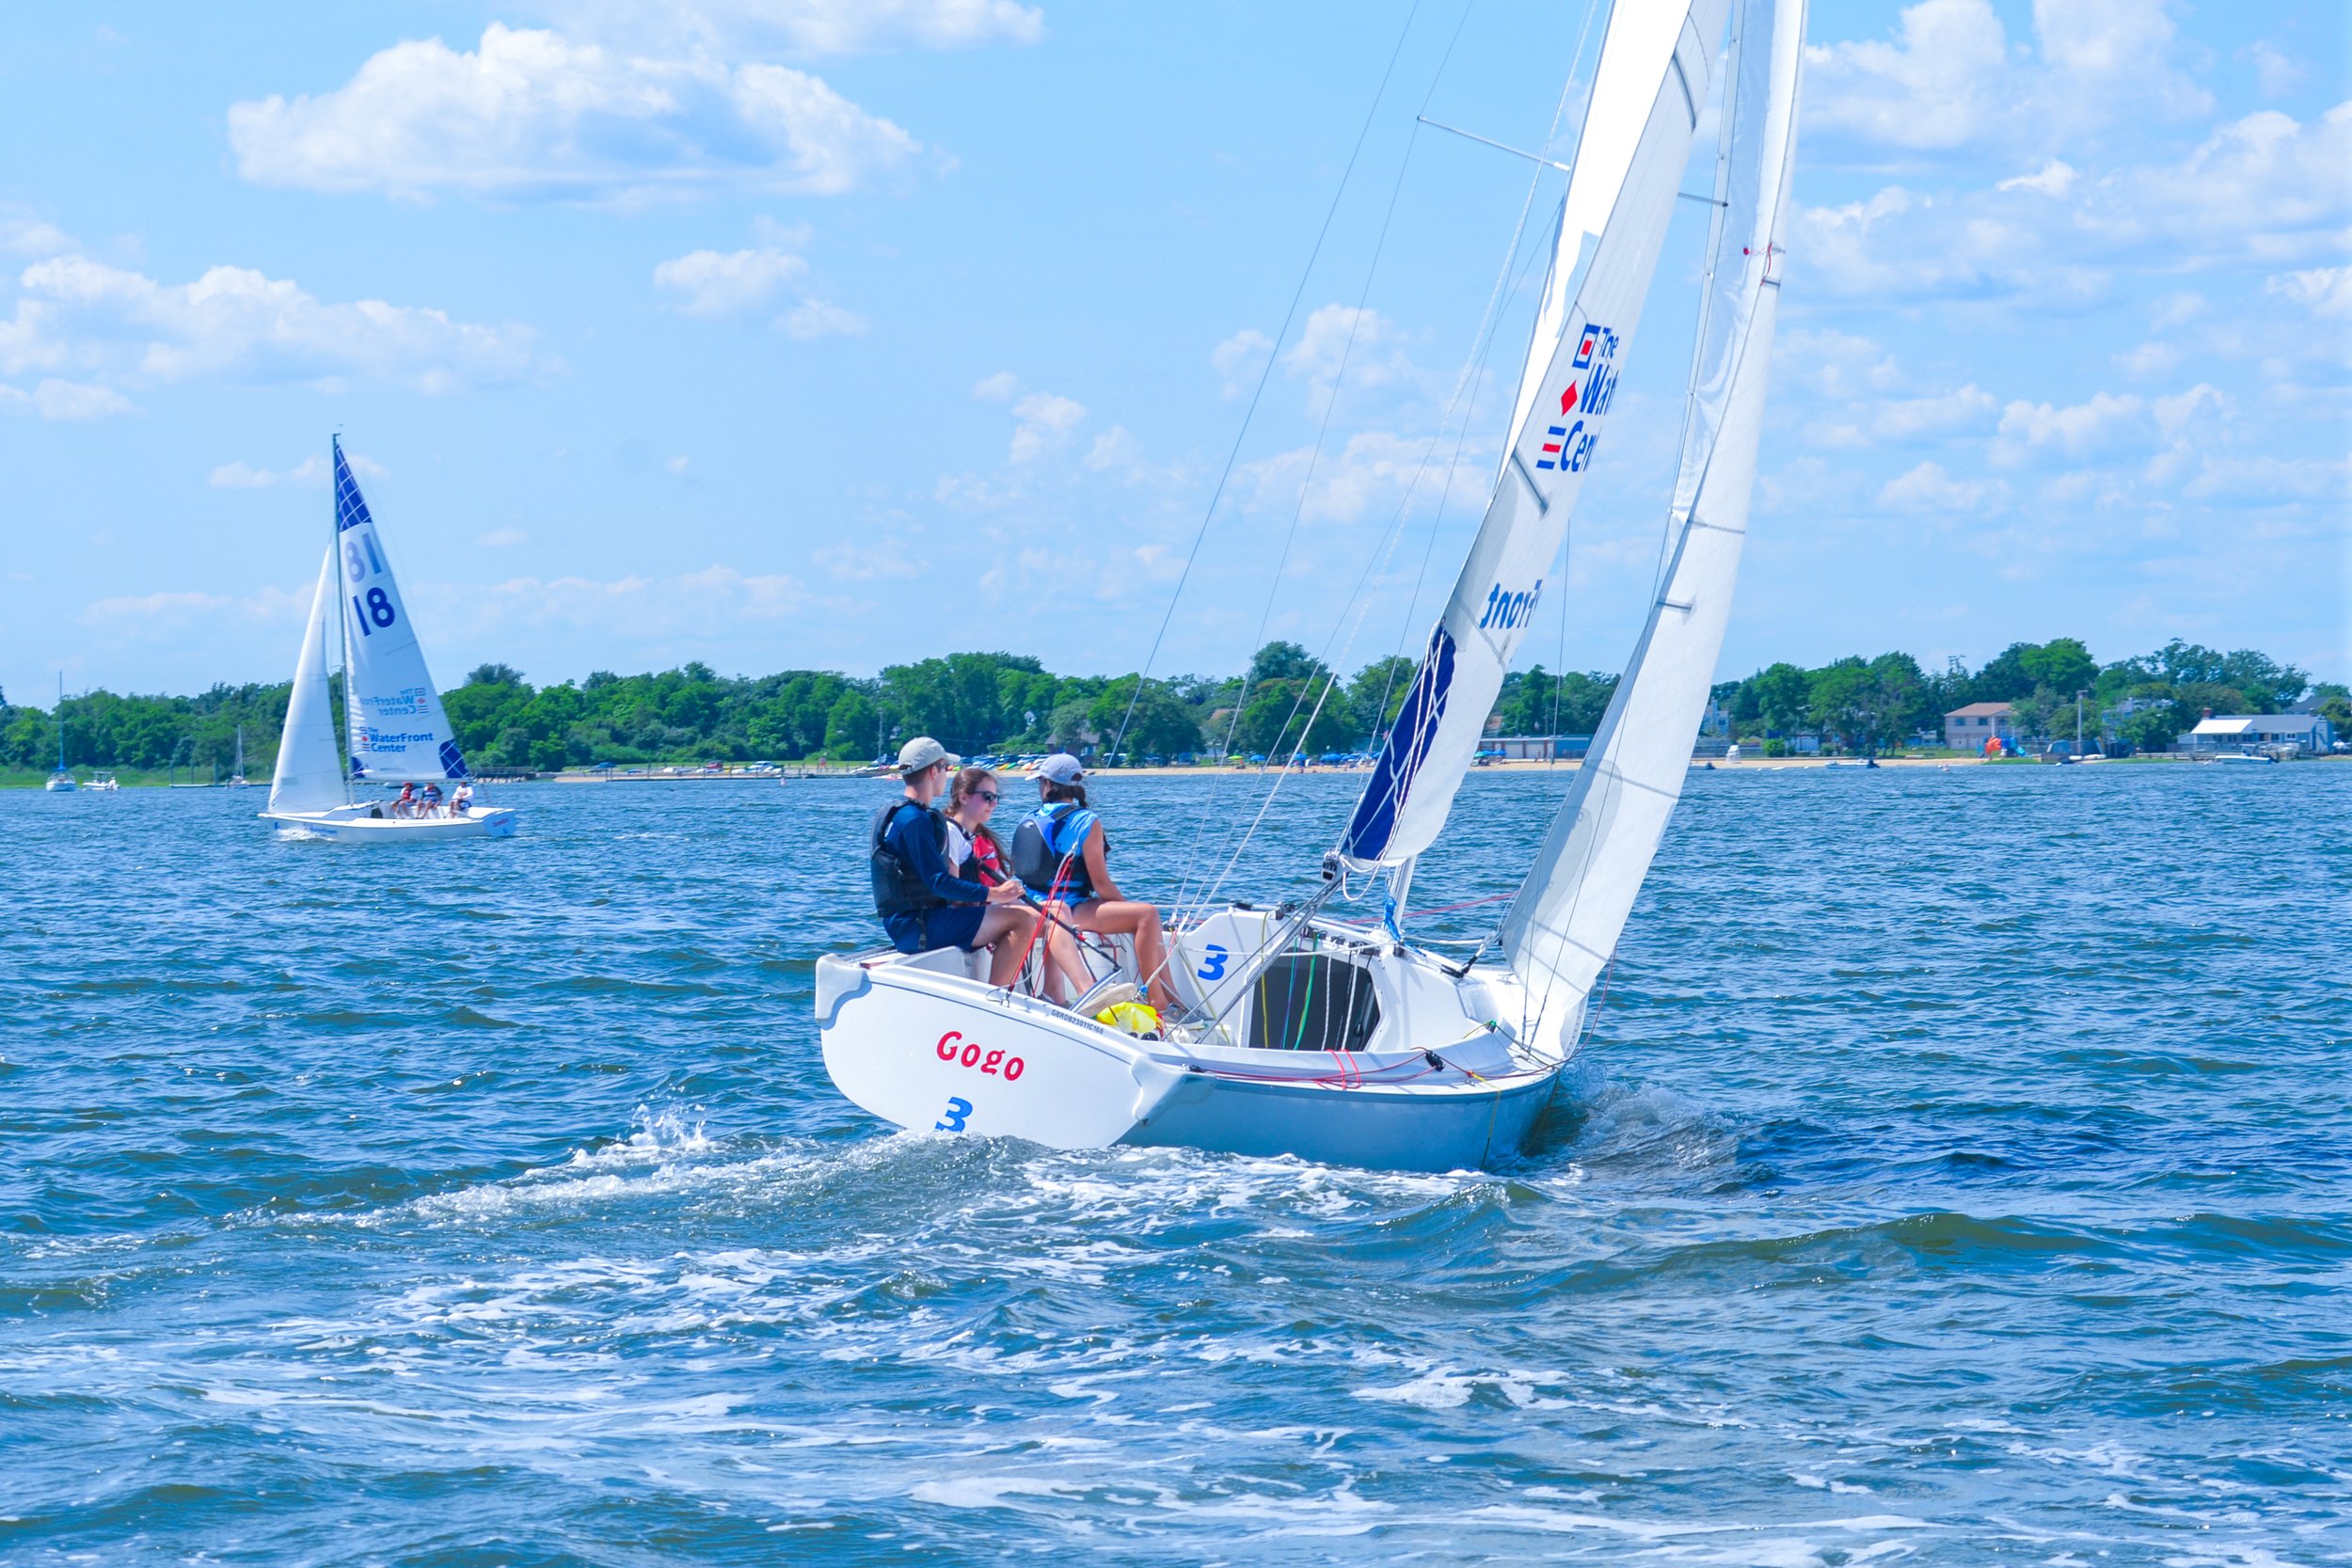 Learn to sail, Sailing Classes, Instructional Clinics, and Certifications — The WaterFront Center